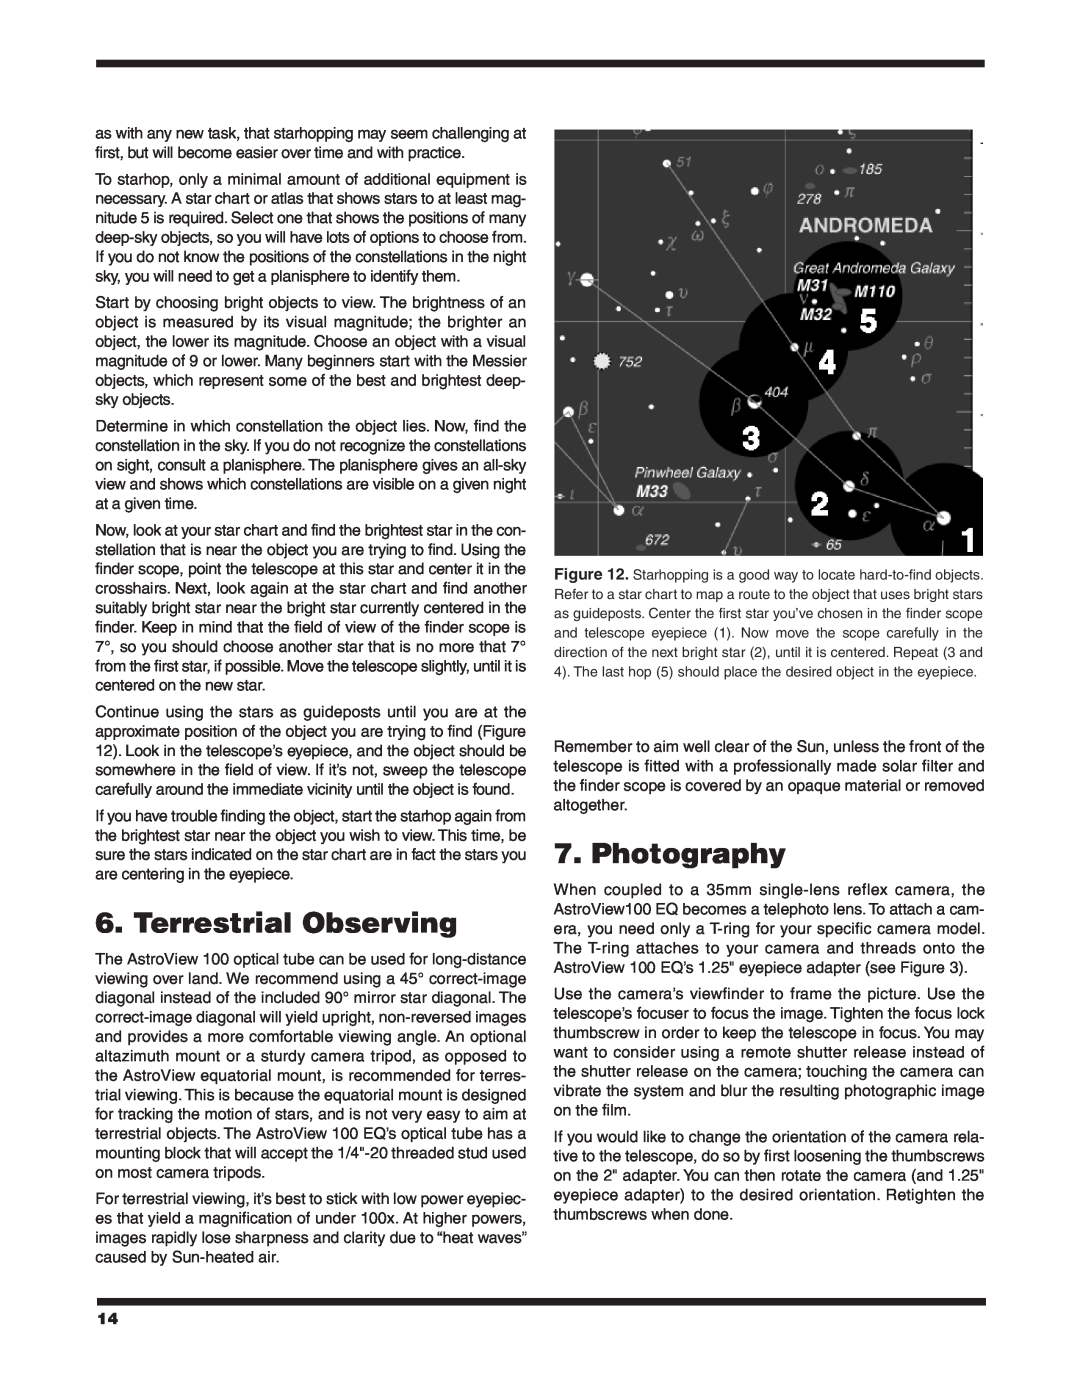 Orion 9862 instruction manual Terrestrial Observing, Photography 